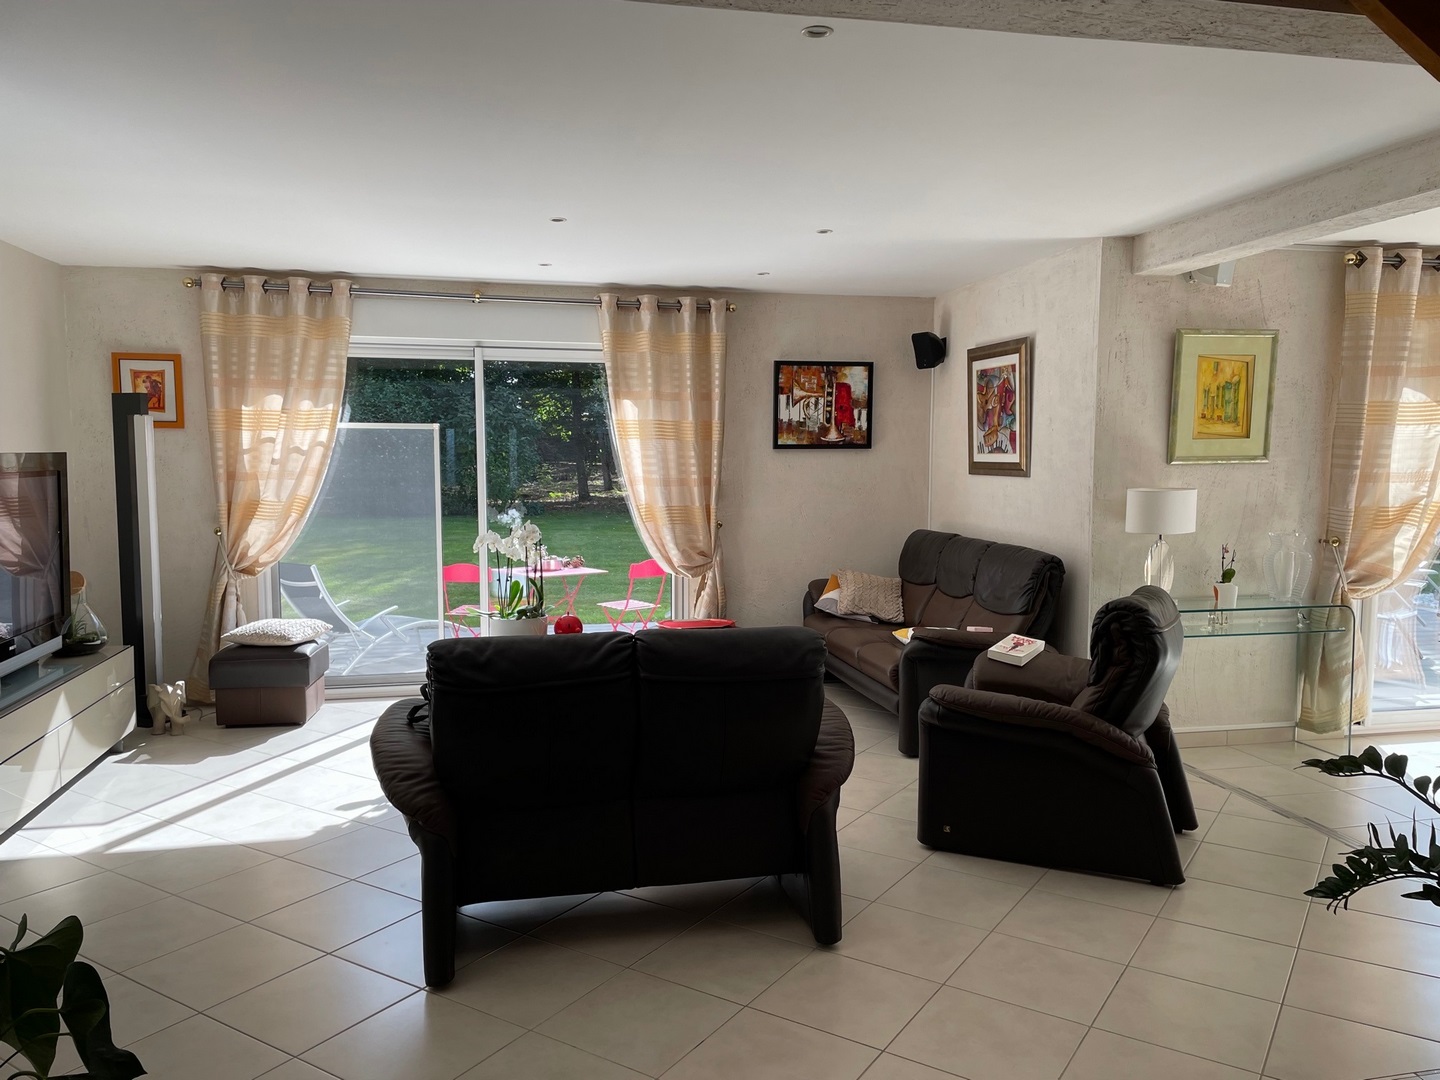 CONTEMPORARY HOUSE 294m² approx SOUTH of TOURS GARAGE CAVE TERRACE PARK 3.300m